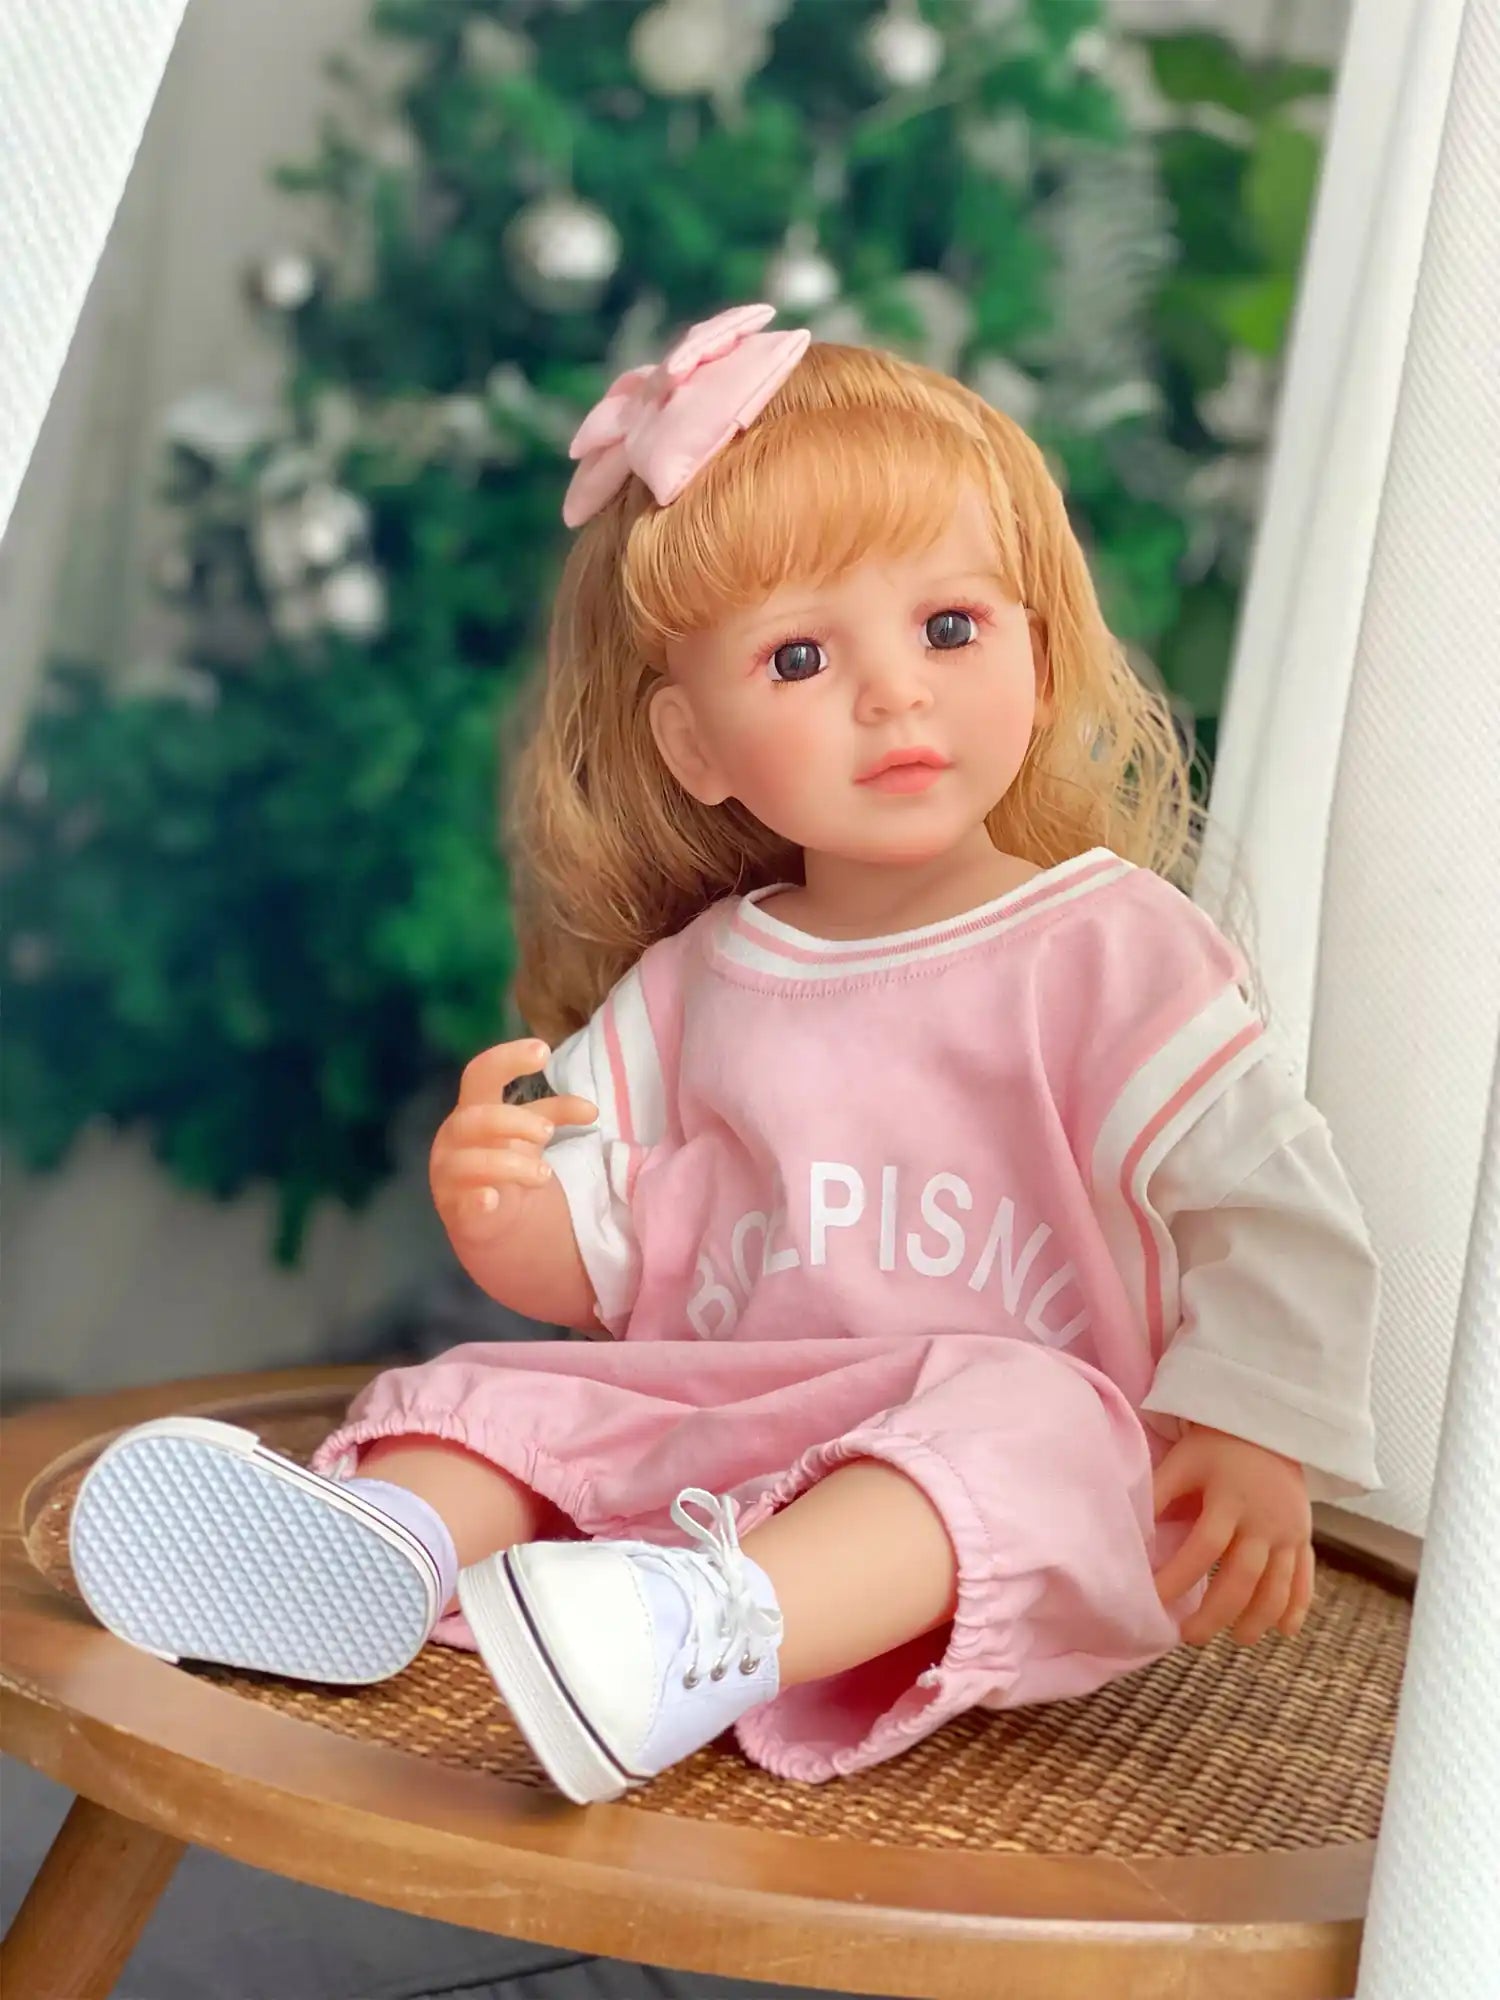 Doll in a relaxed pose, showcasing playful yet fashionable attire, ready for a festive occasion with a decorated tree behind.